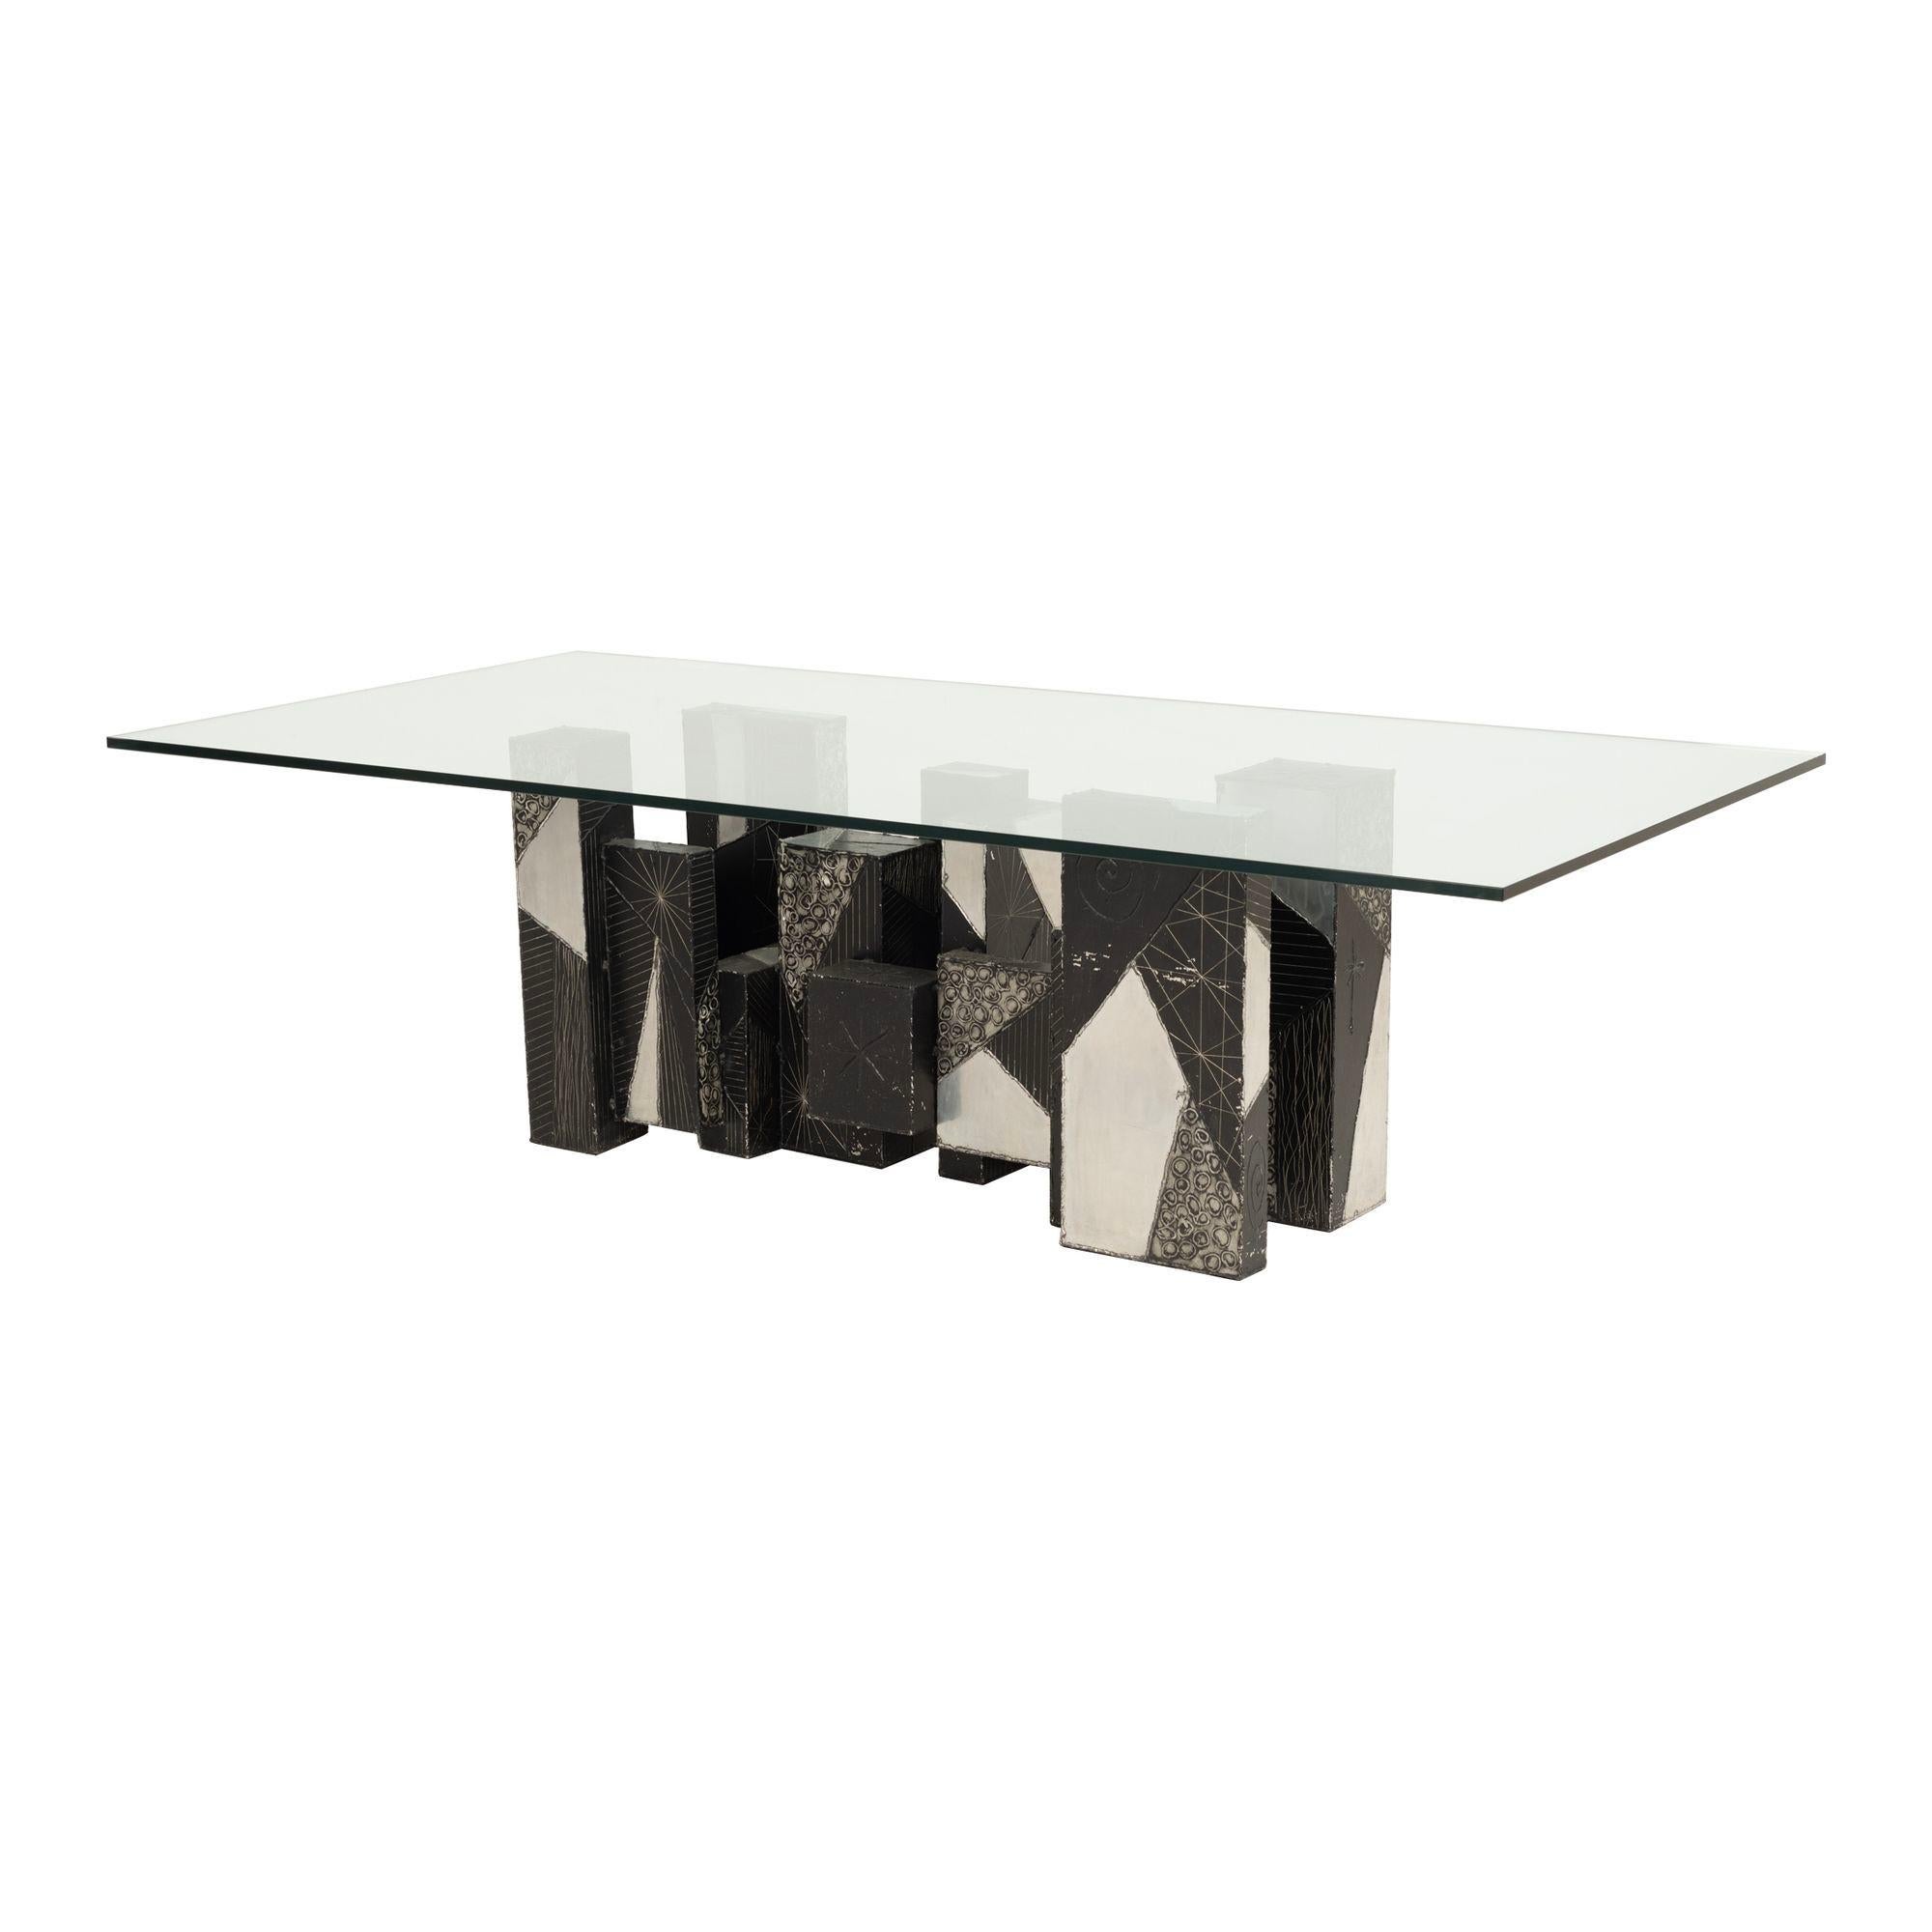 

Paul Evans Studio for Directional Argente Unique Dining Table
Welded and patinated aluminum with 3/4